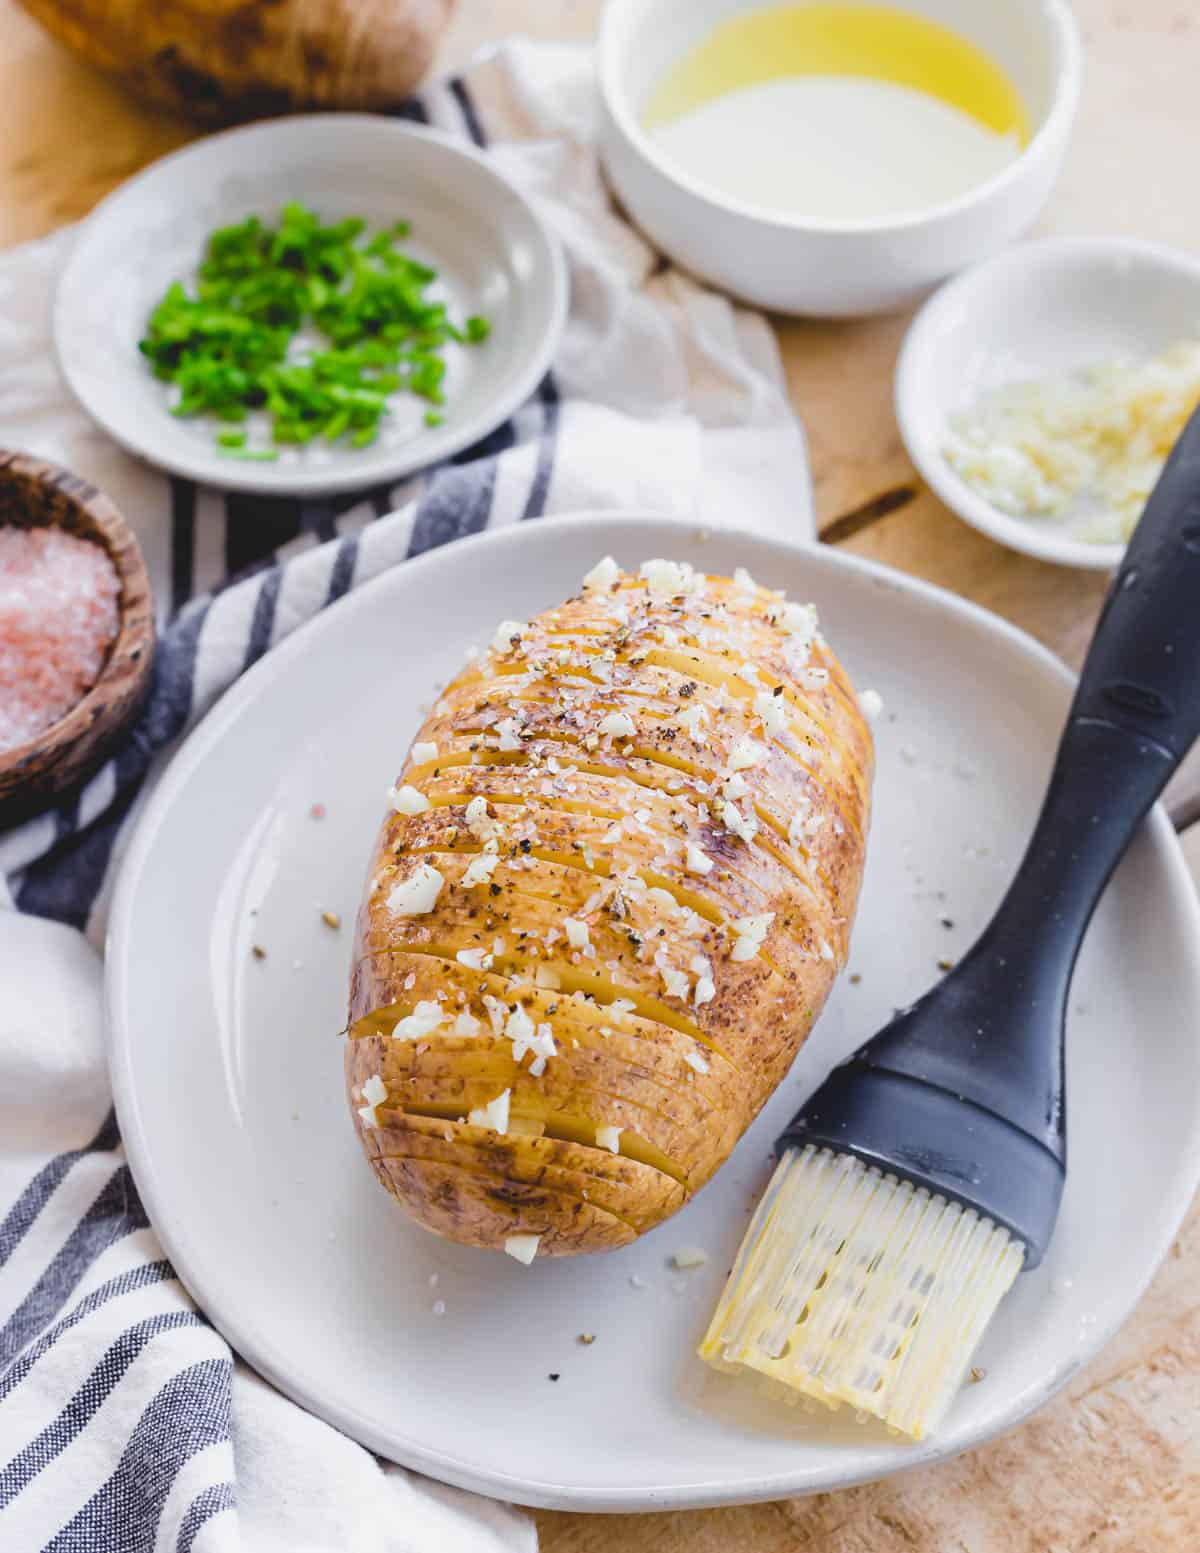 A russet potato thinly sliced in hasselback fashion seasoned with ghee, salt, pepper and minced garlic on a plate with a silicone brush.